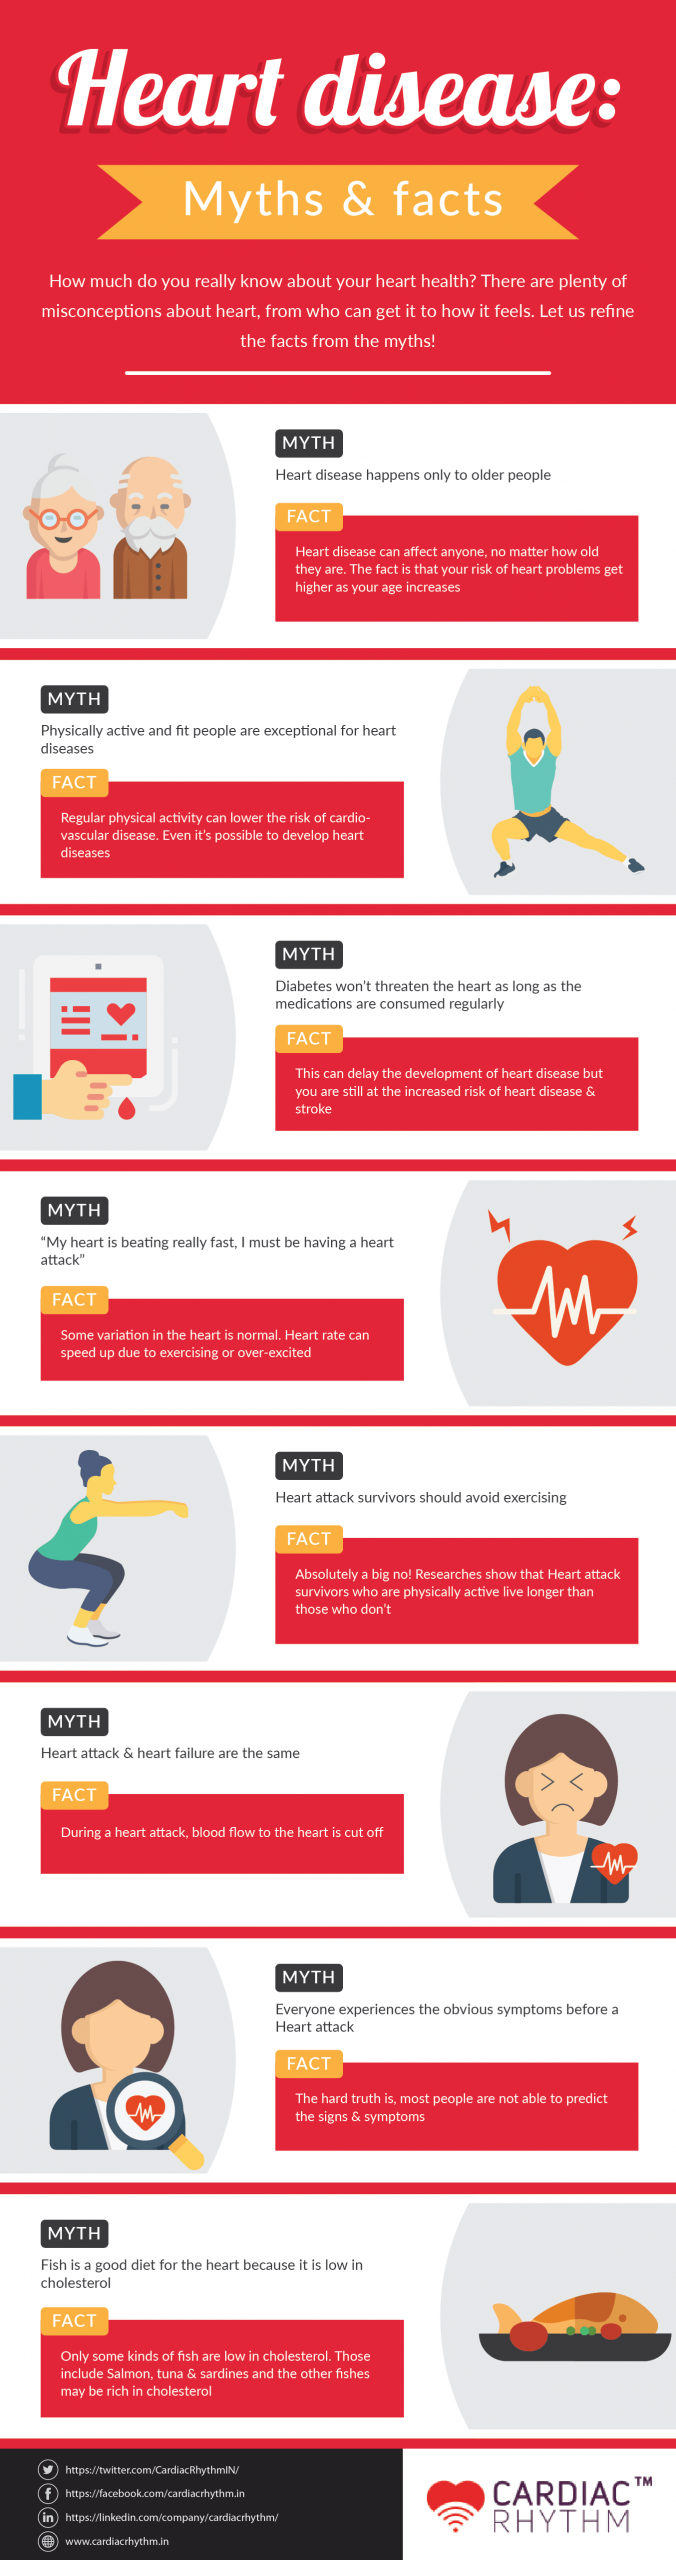 Myths & Facts of Heart Disease